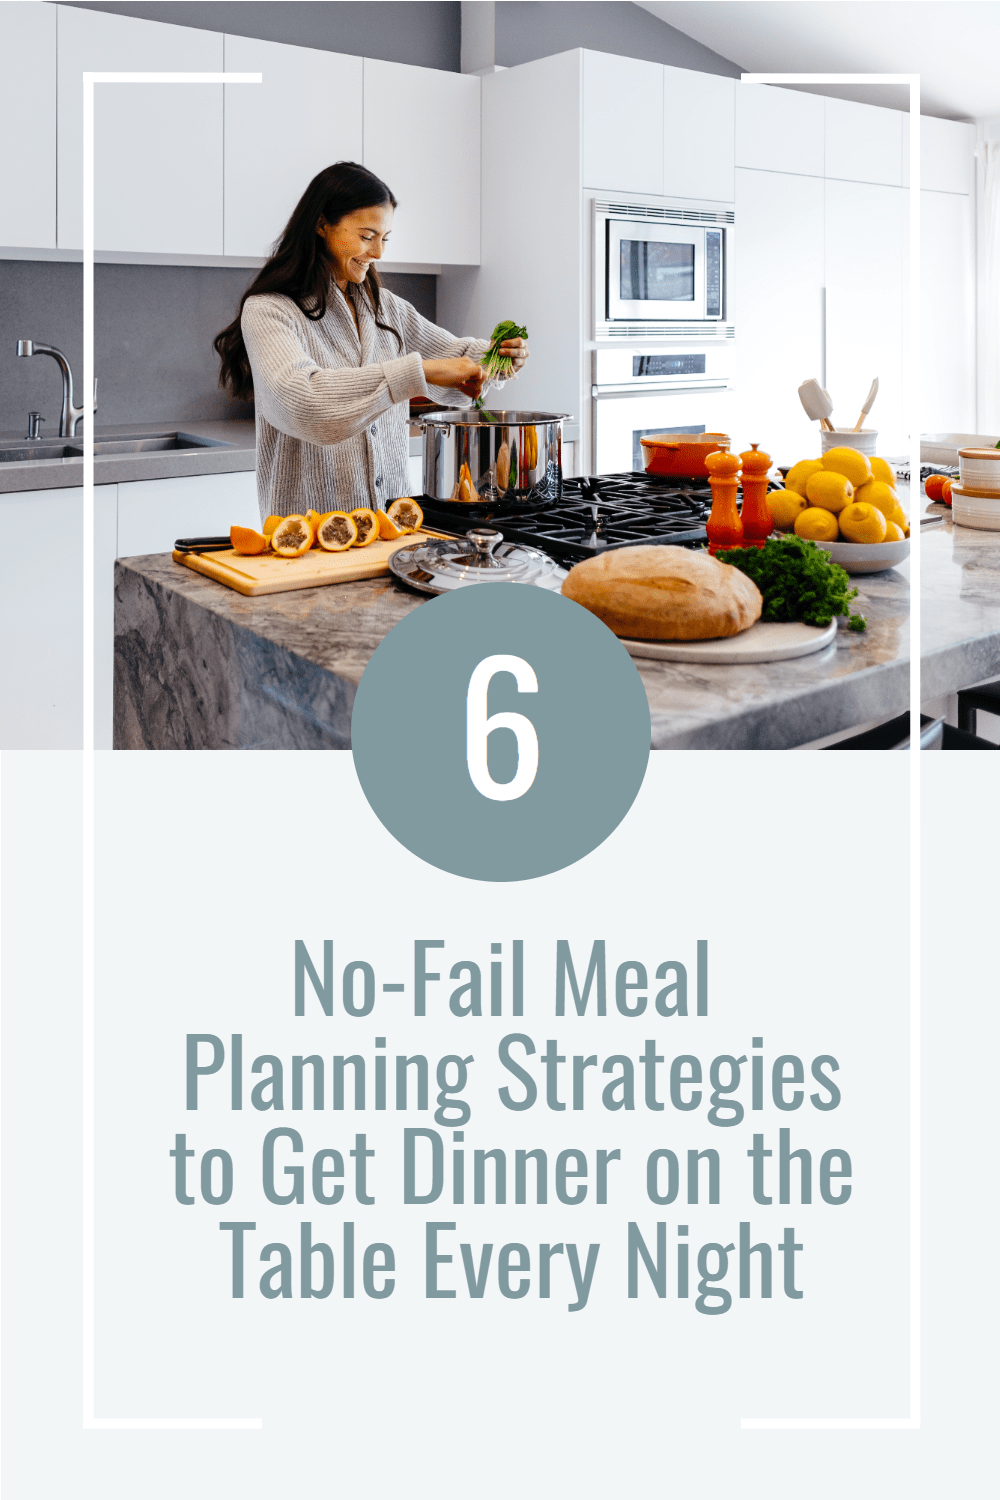 Meal prep using 6 no-fail meal planning strategies from Rooms Need Love